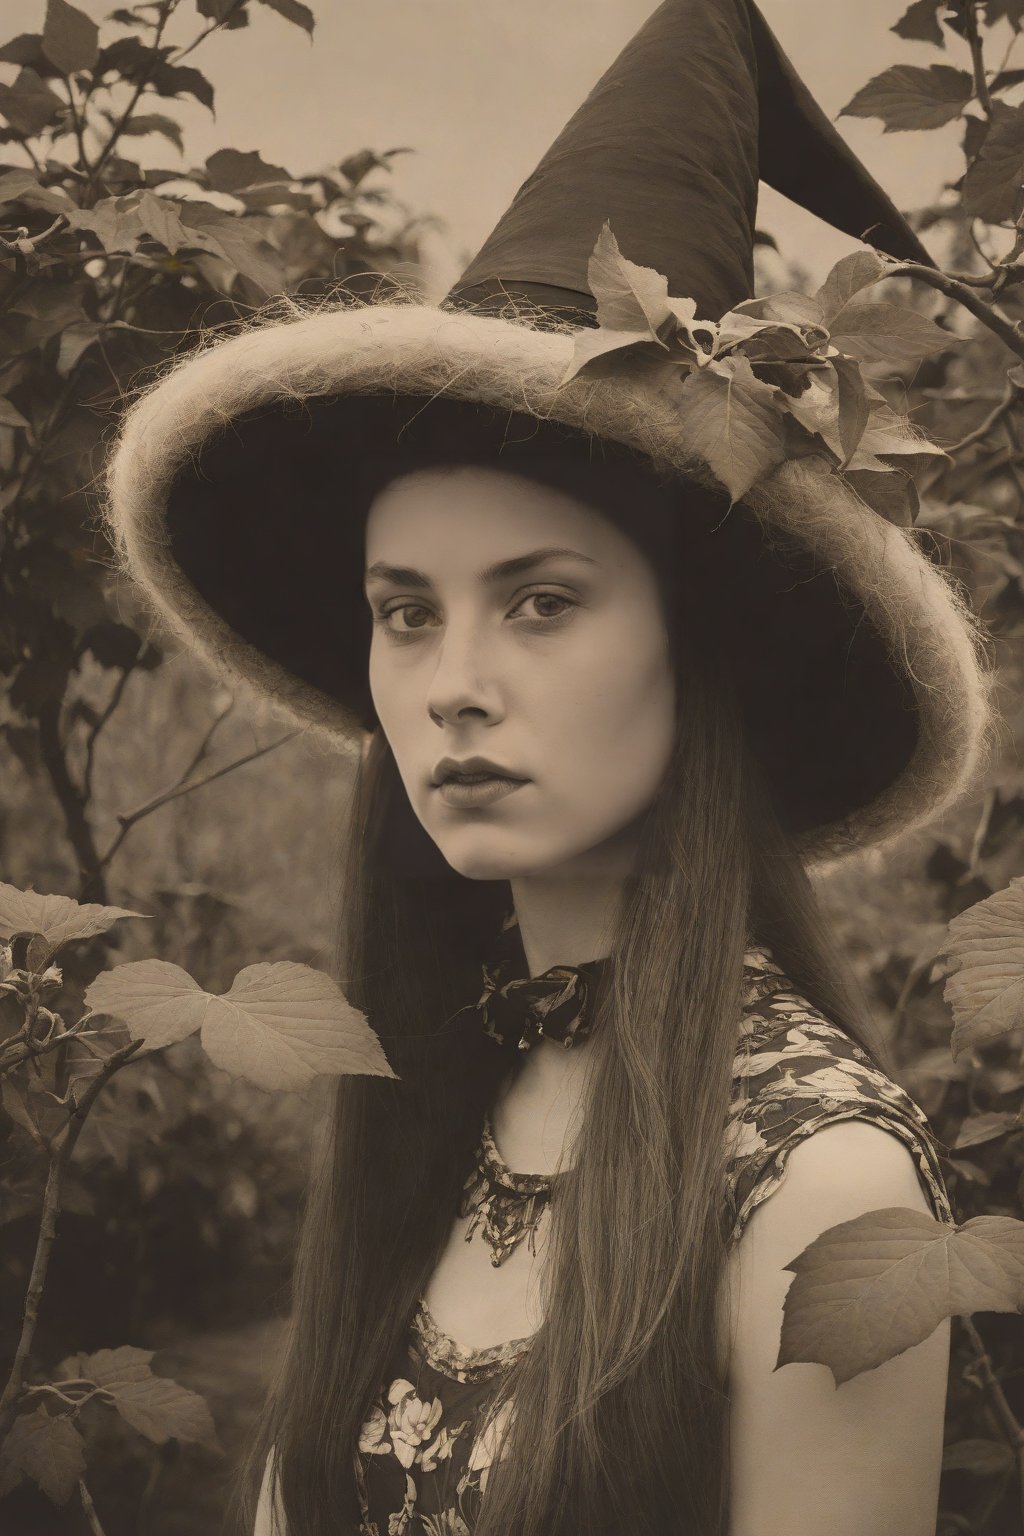 designed by Bronzino, photograph, garden, Furious (1girl:1.3) , she is wearing a Wizard hat that was forged by Apple computers, It is, Bending backwards, Twist out hair, she has a Fur Scarf, plain BW background, Wide view, Hopeless, Cinematic, Fujicolor C200, L USM, Vivid Colors